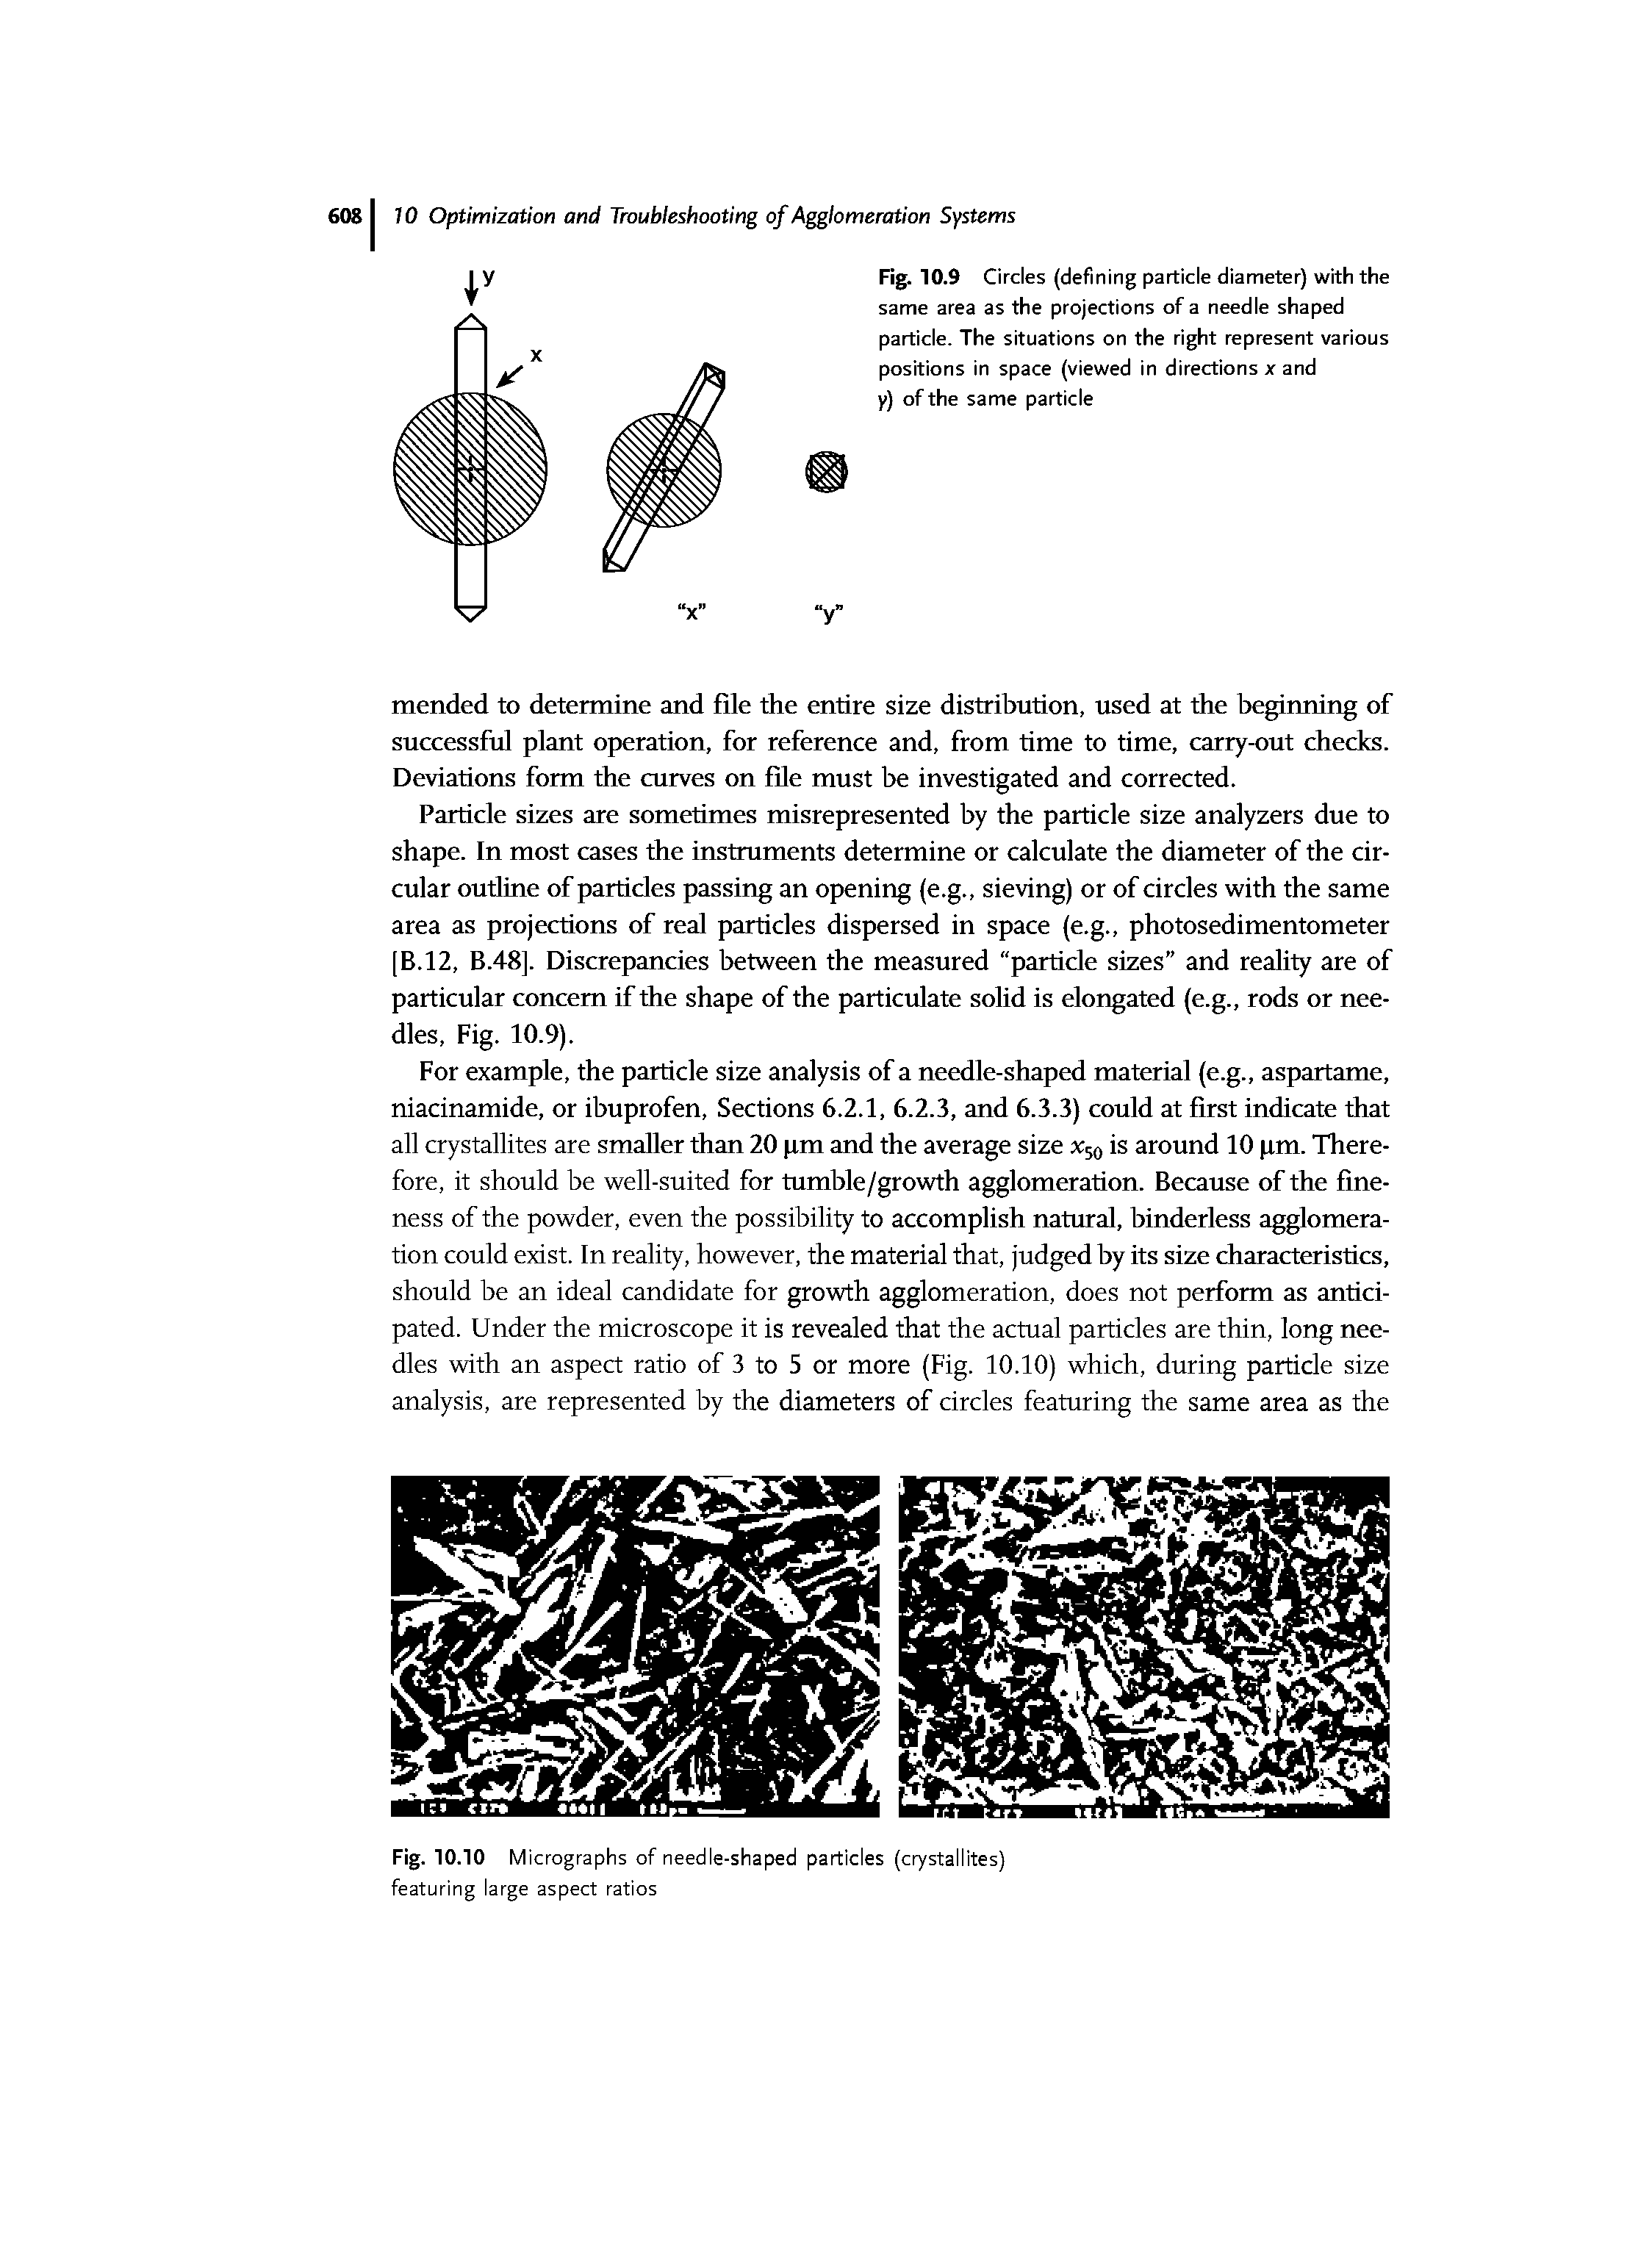 Fig. 10.10 Micrographs of needle-shaped particles (crystallites) featuring large aspect ratios...